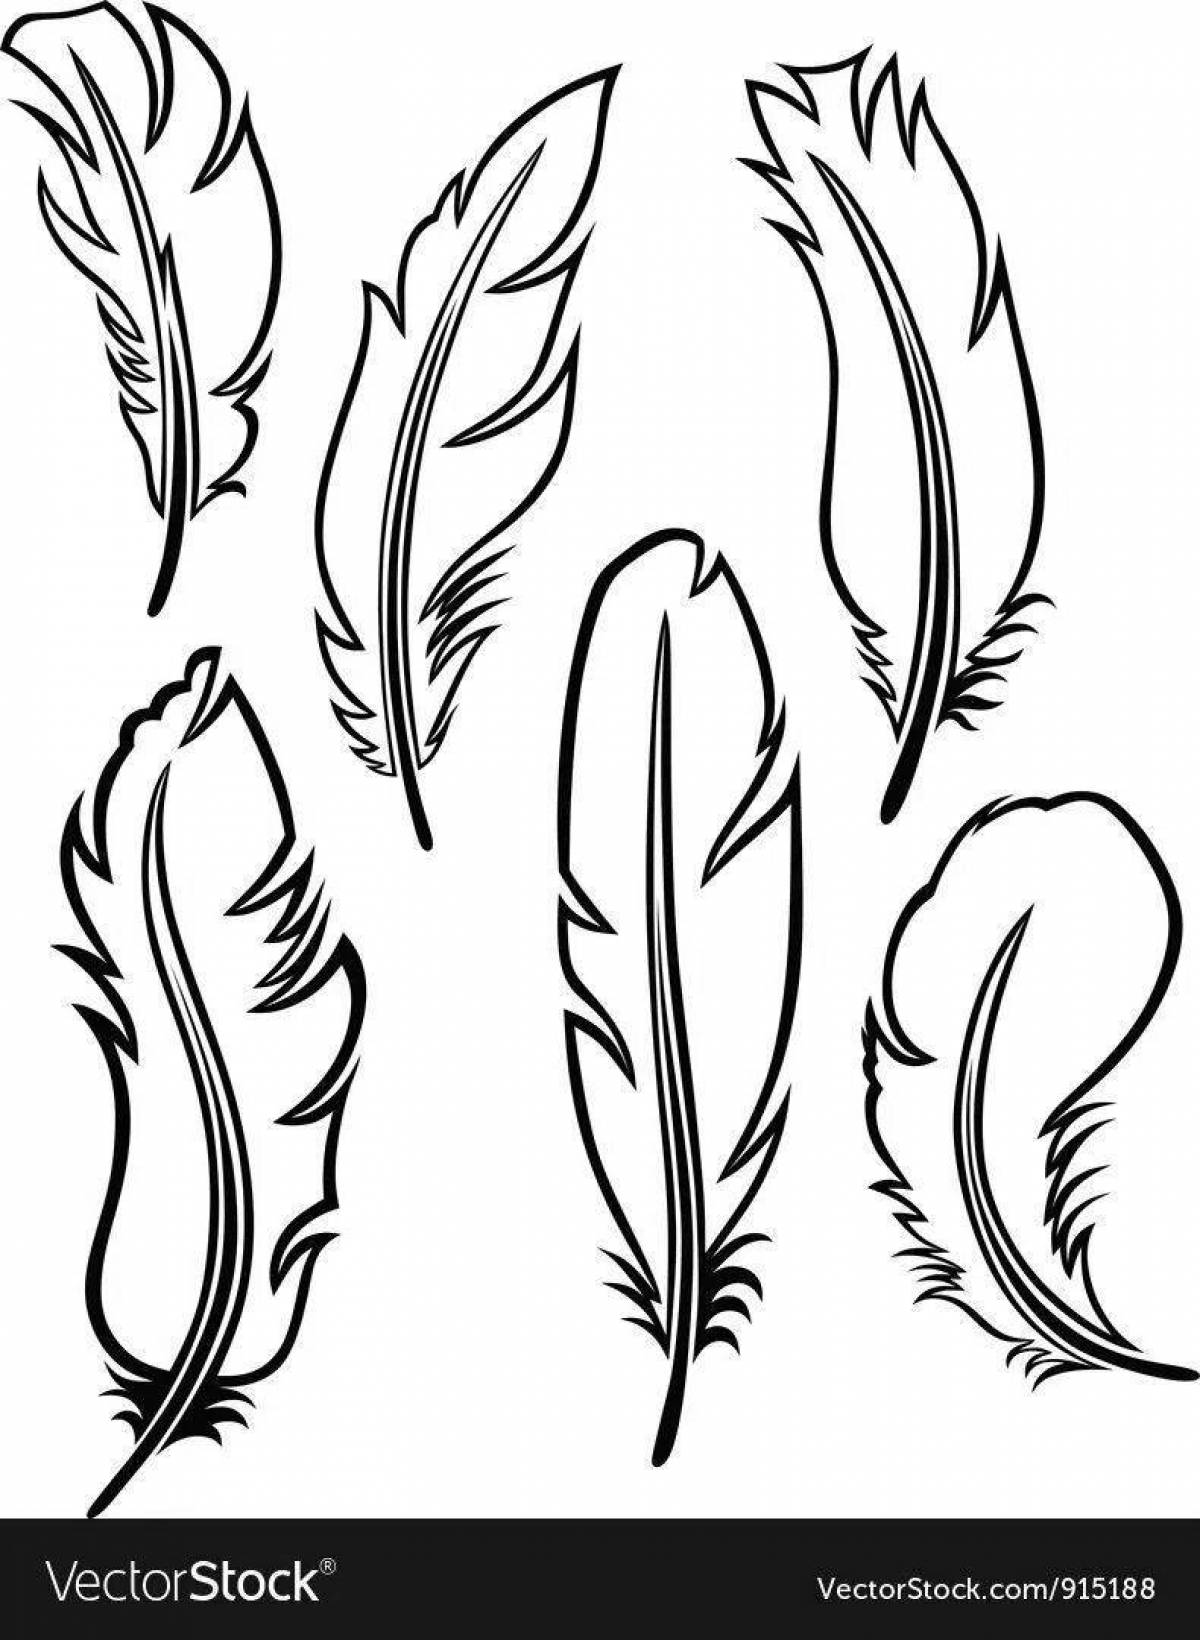 Coloring page delicate feather pattern